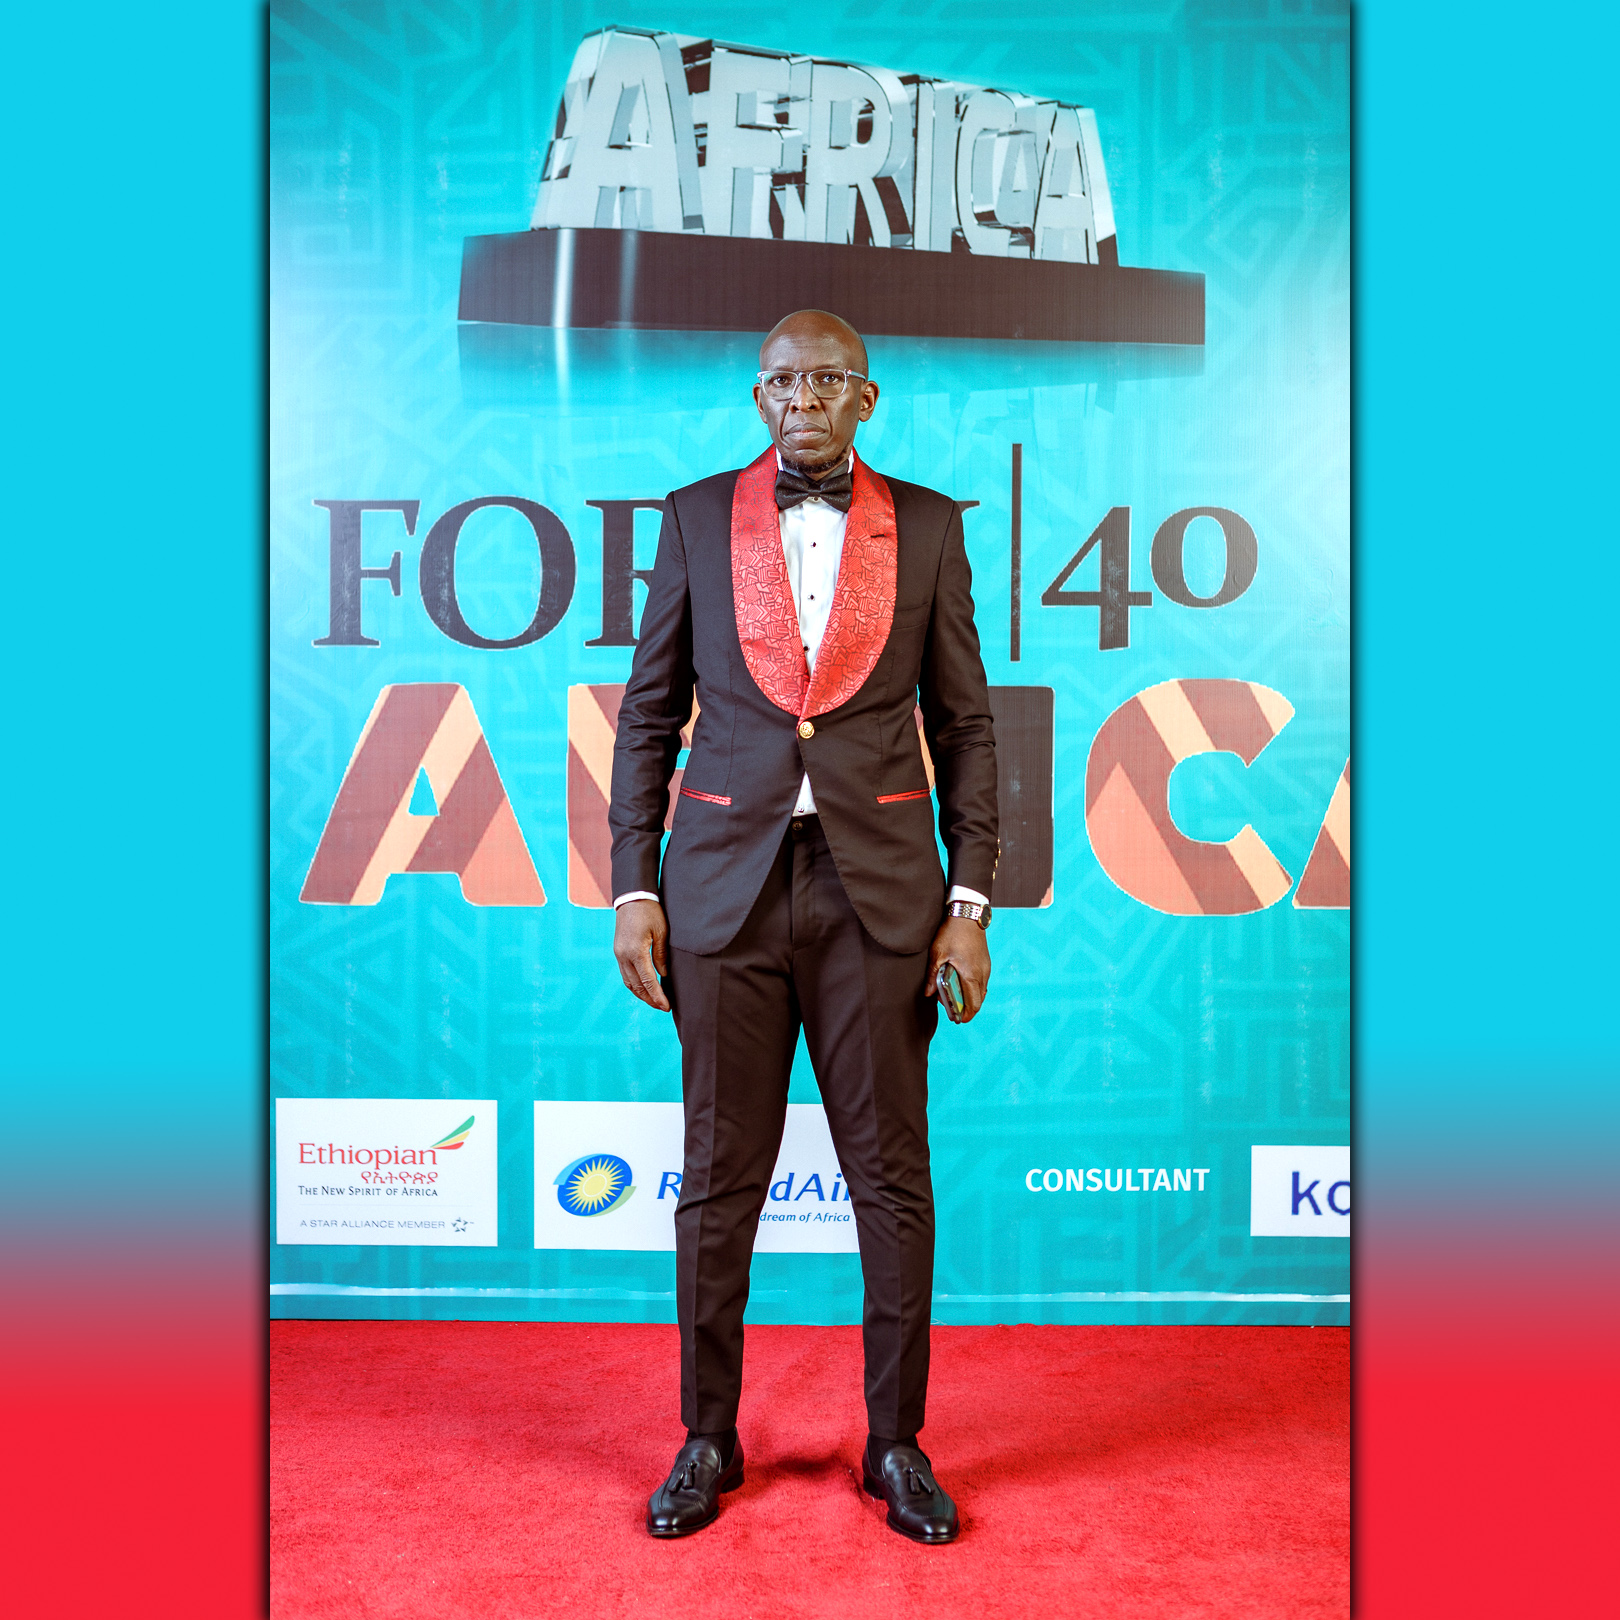 King Kris Senanu as a judge in King Sidney at the top 40 under 40 Africa